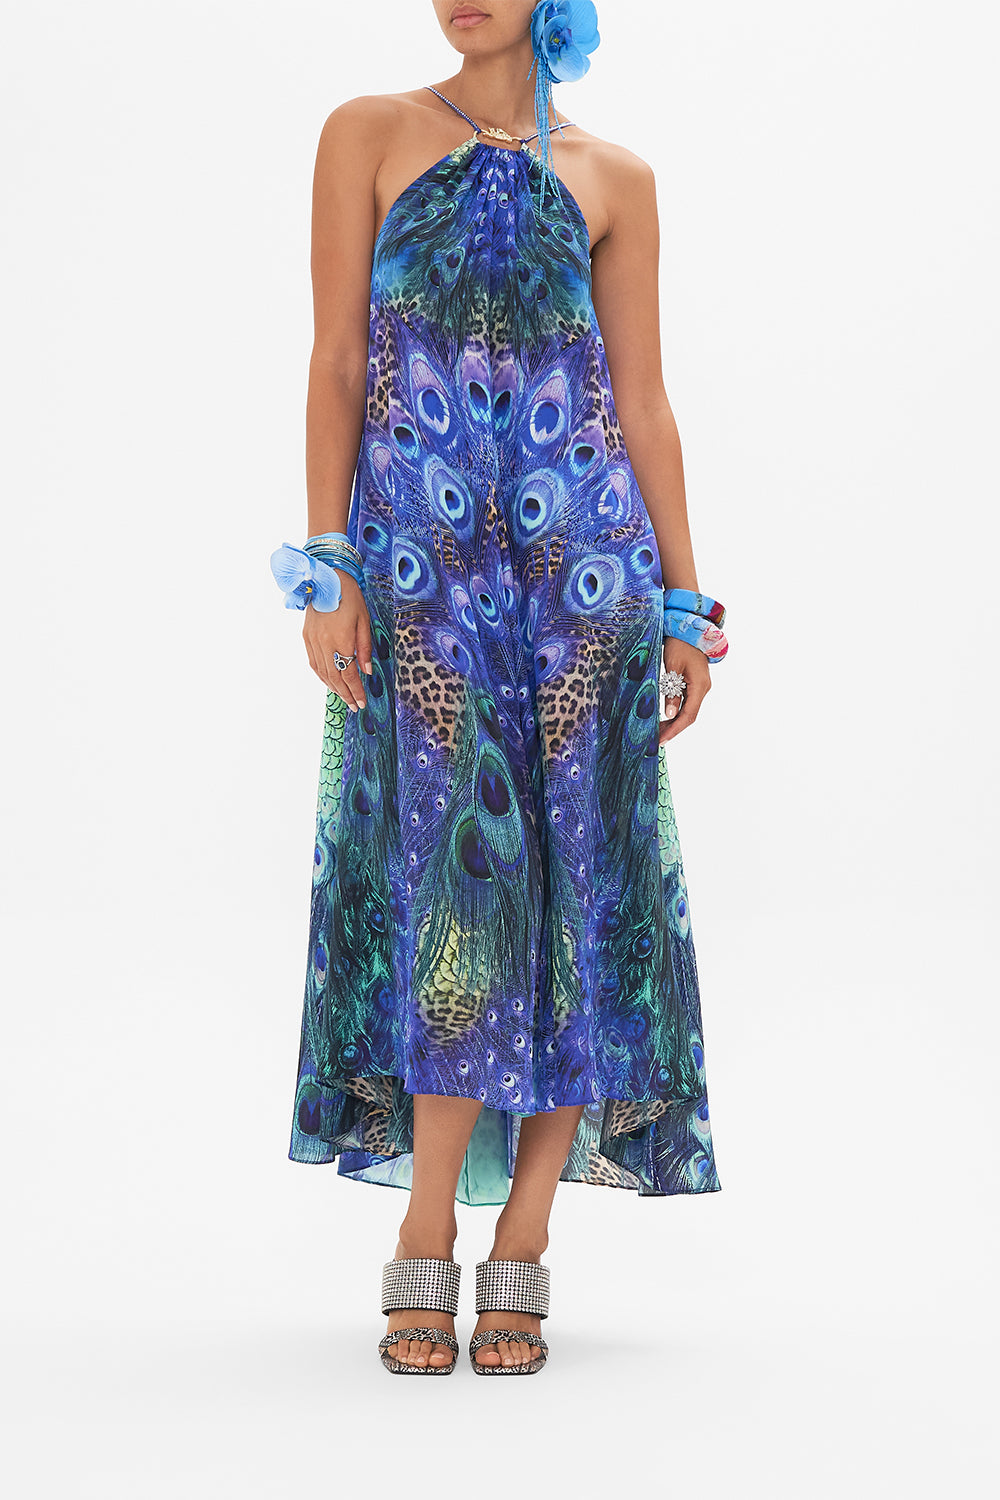 Front view of model wearing CAMILLA silk maxi dress in Peacock Rock print